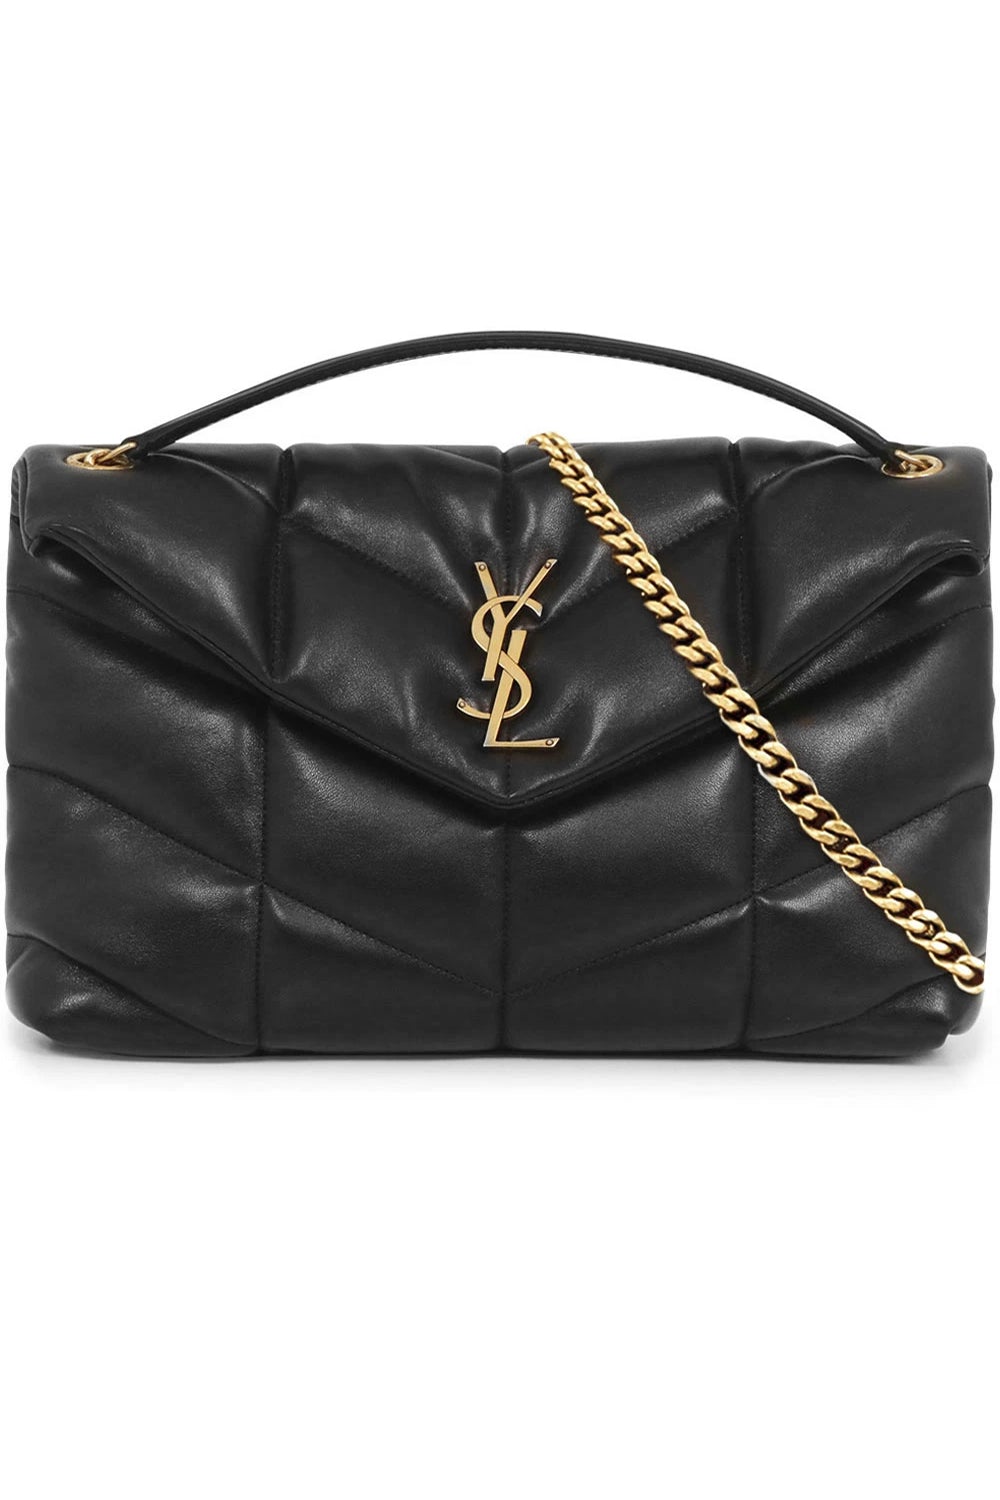 Authentic !! Ysl loulou puffer bag mini (23×15) Rp 20,7××,××× ✓✓ . . .  #naddysl #ysllouloupuffer #ysllouloumini